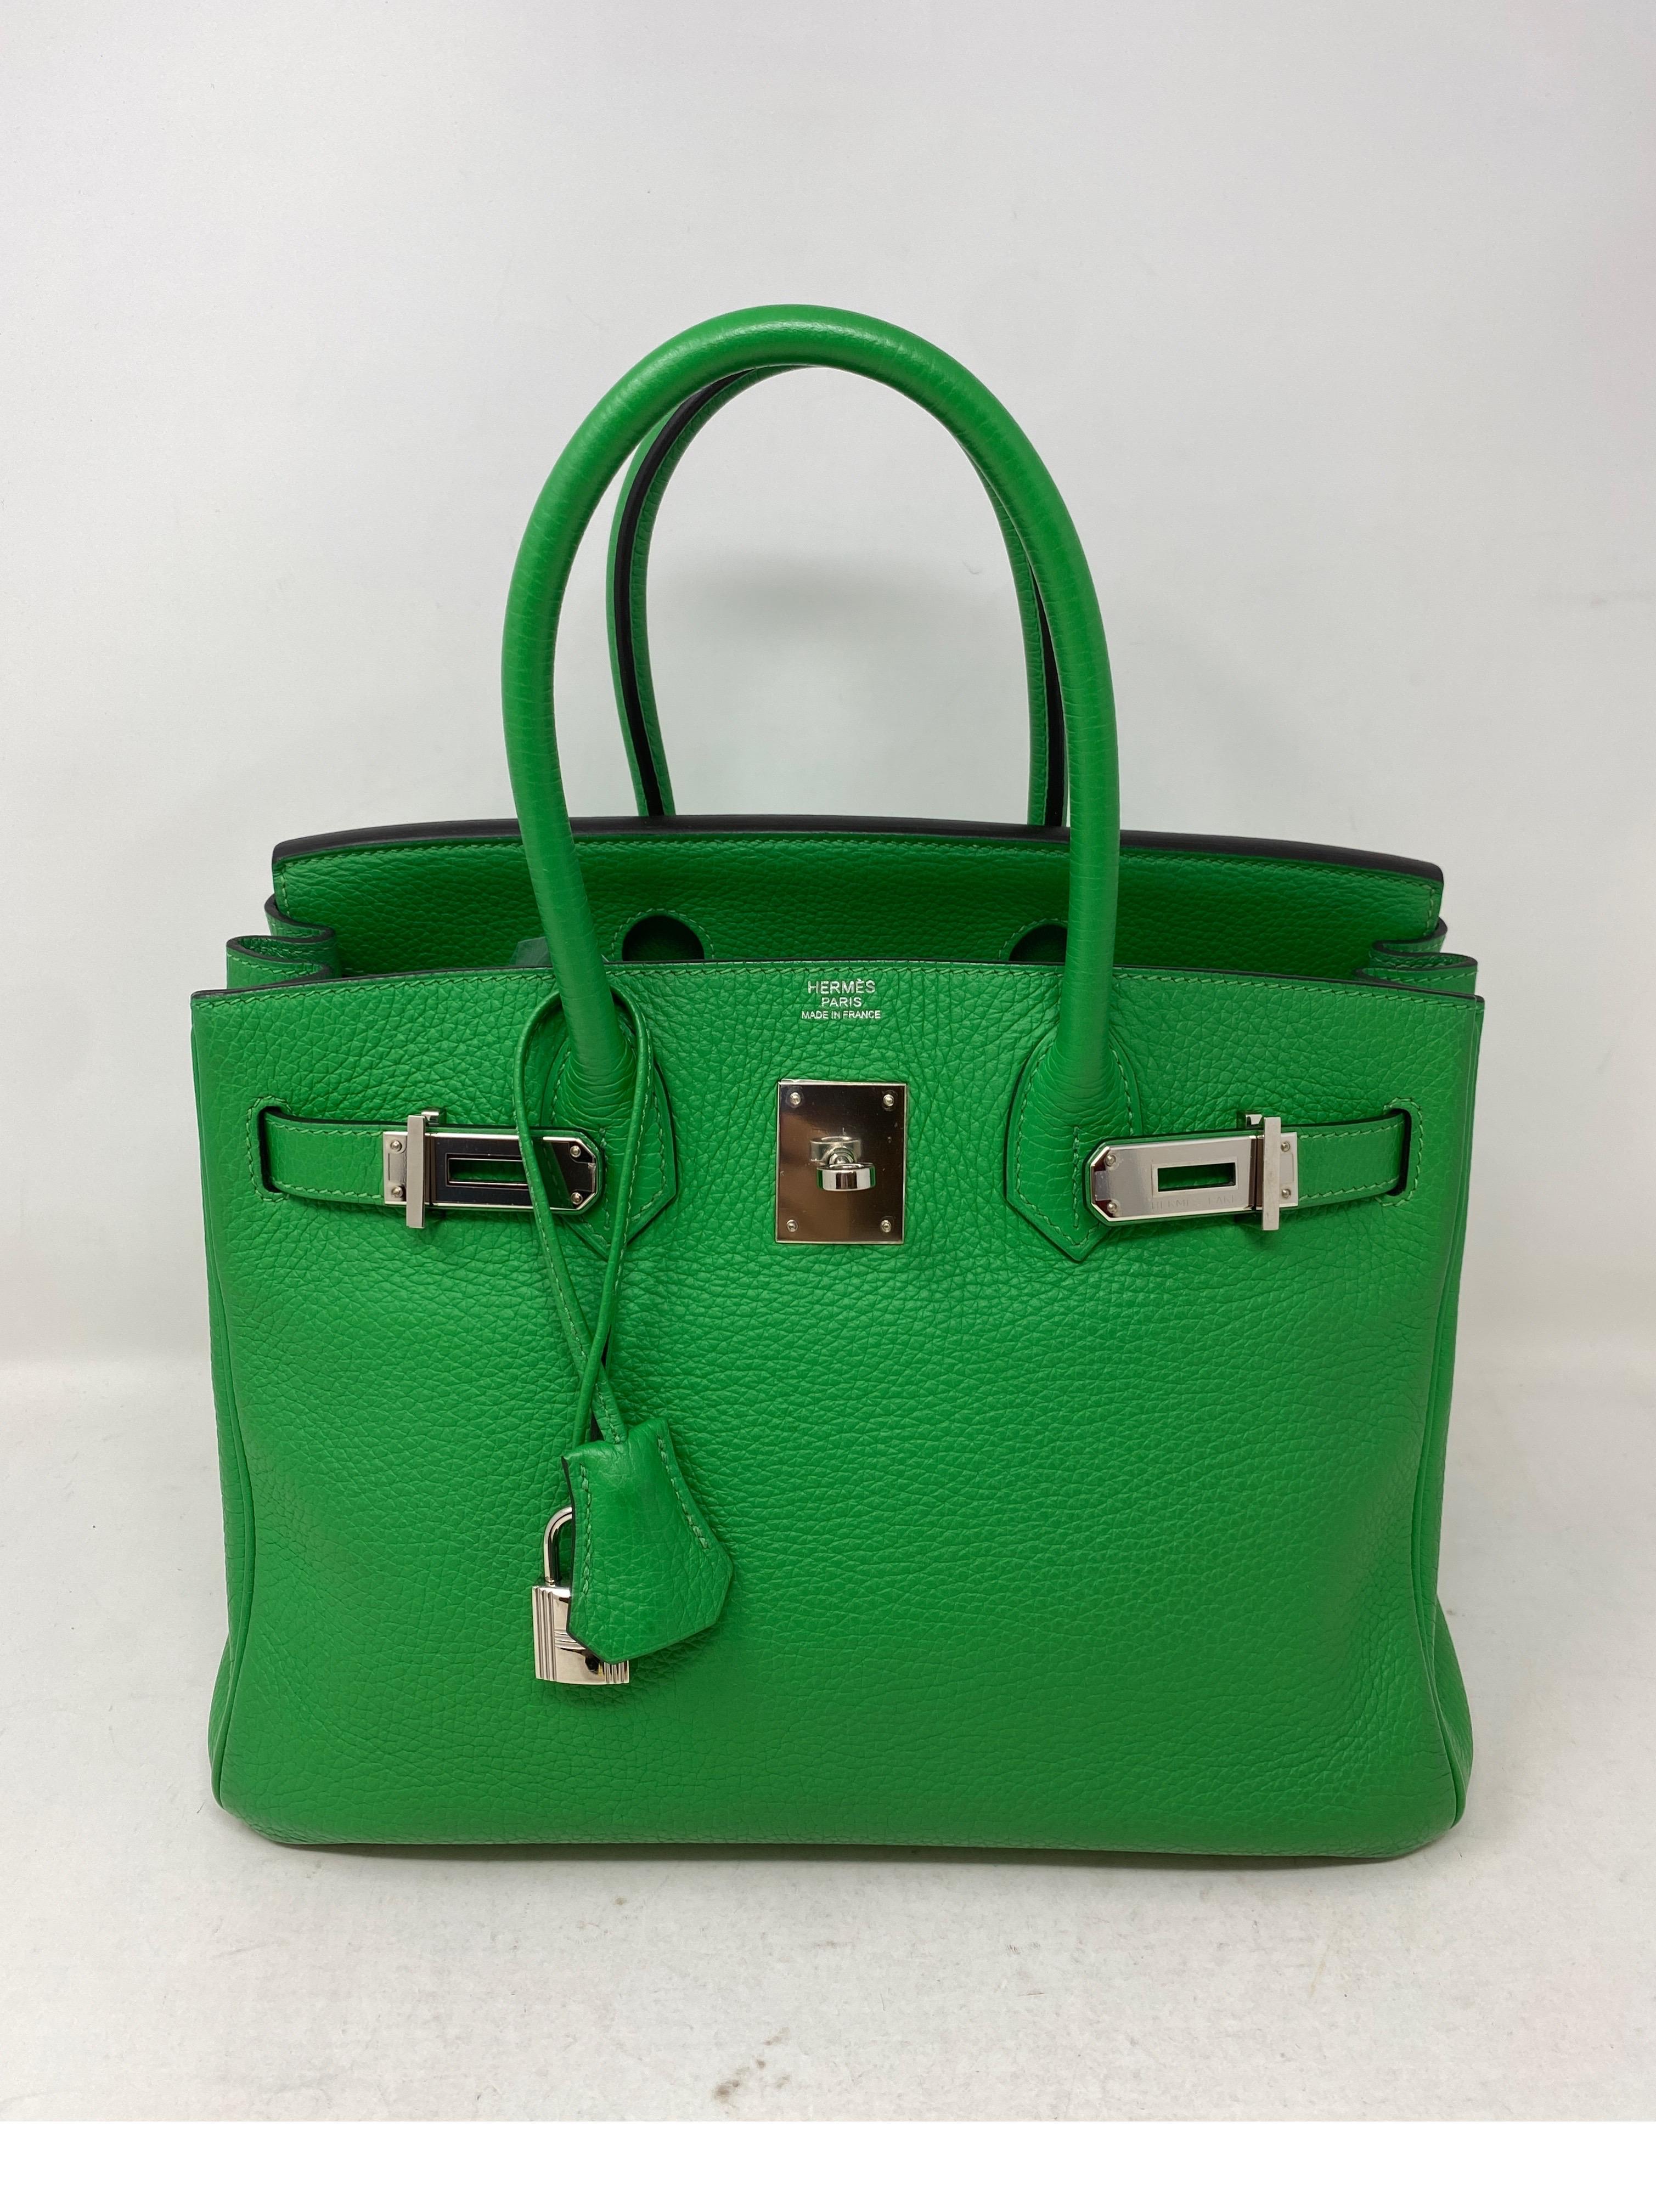 Hermes Bamboo Birkin 30 Bag. Gorgeous green color in clemence leather. Palladium hardware. Most desirable green color. Won't last long. Mint like new condition. Includes clochette, lock, keys, and dust cover. Guaranteed authentic. 